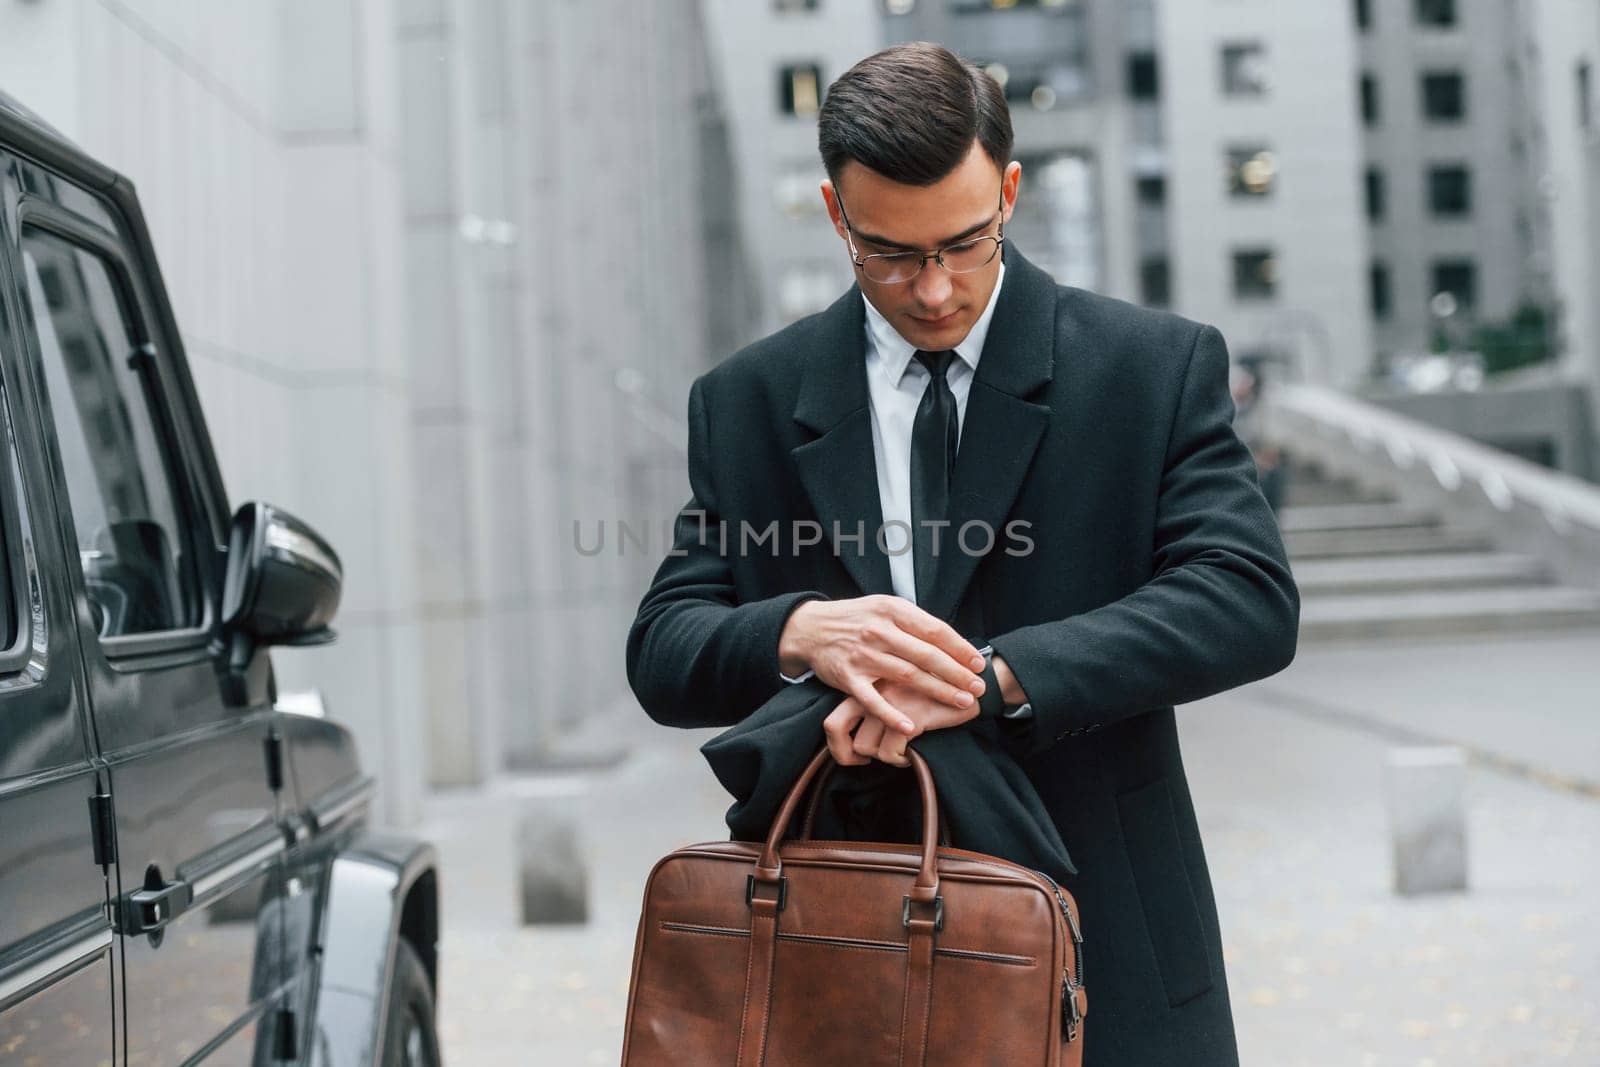 Holding brown bag in hands. Businessman in black suit and tie is outdoors in the city by Standret